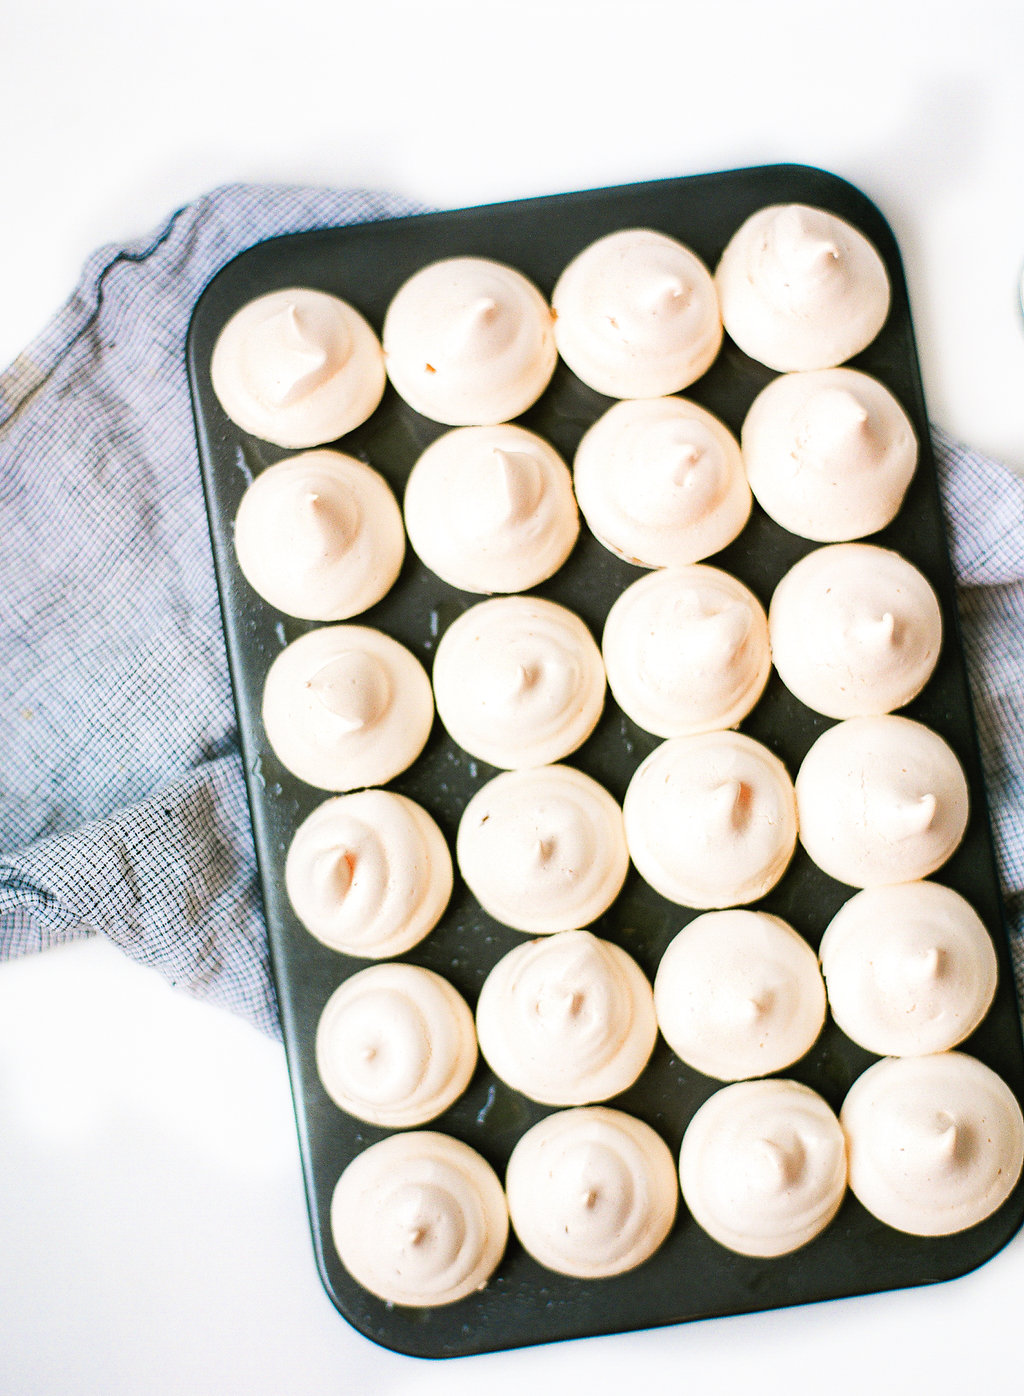 These Cuban meringues are delicious, adorable and wildly easy to make!